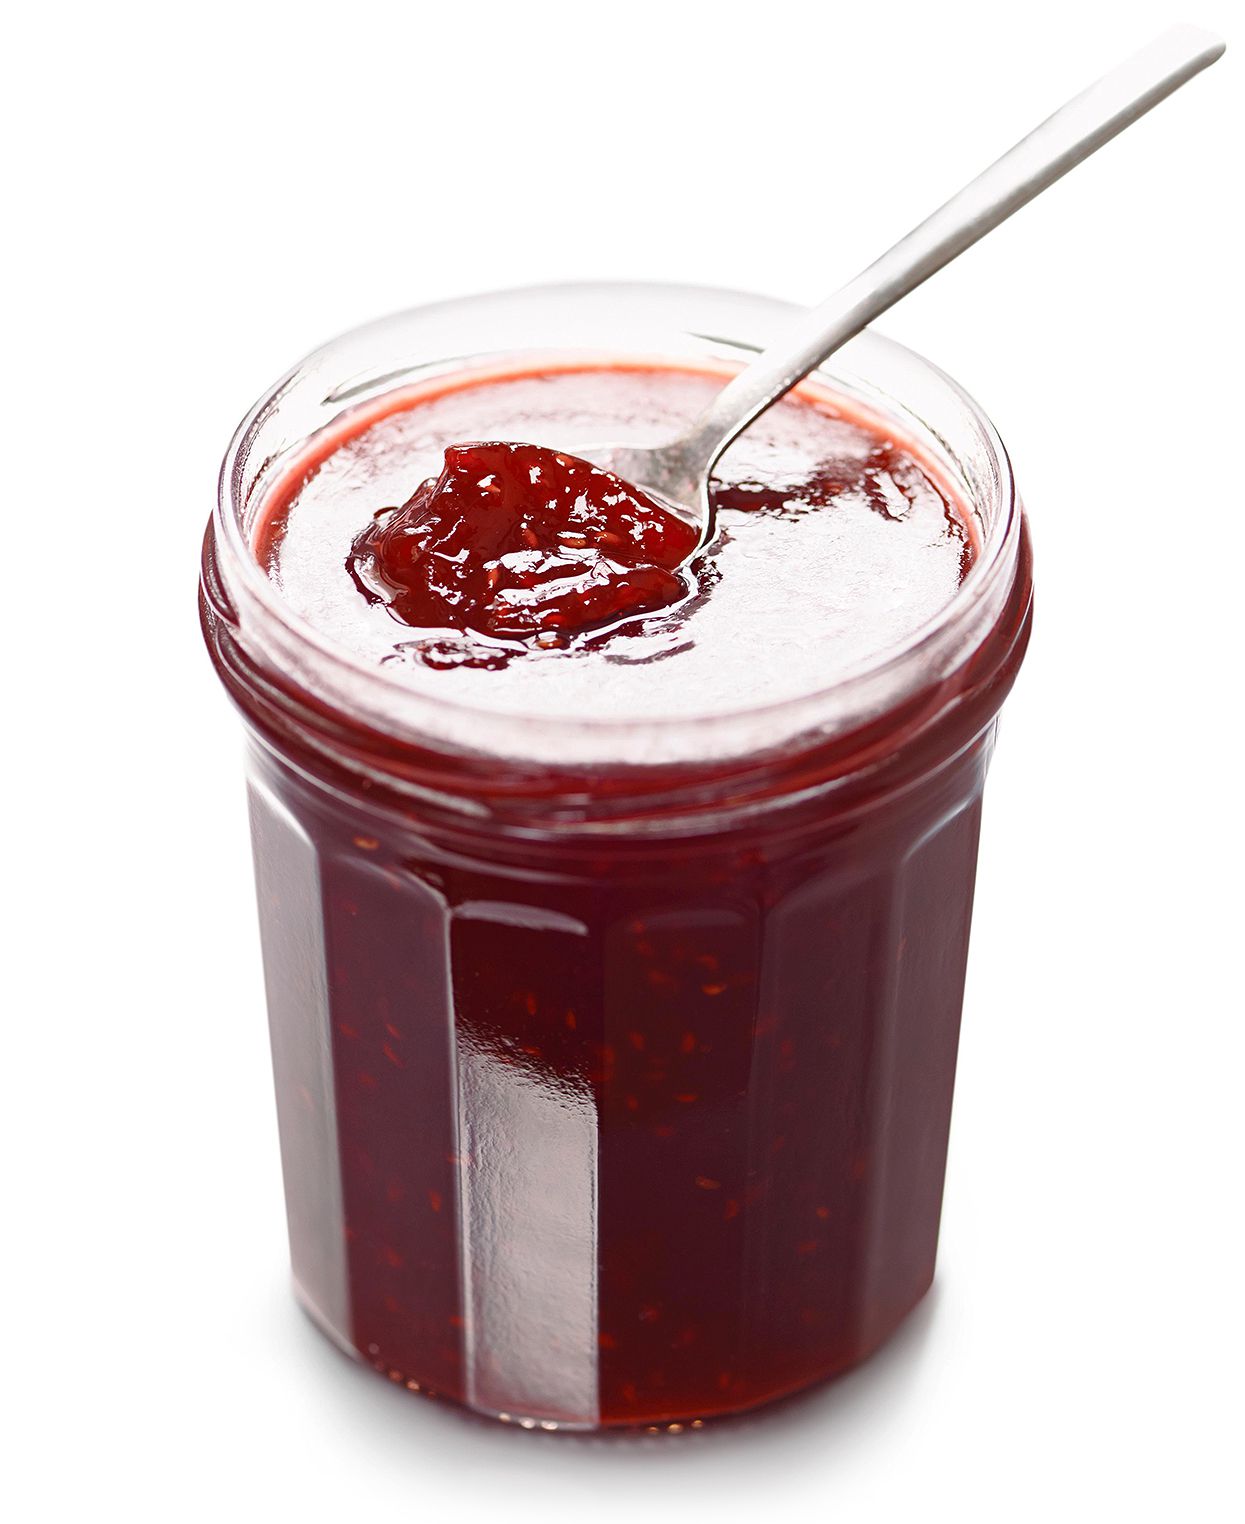 glass jar with red jam and spoon